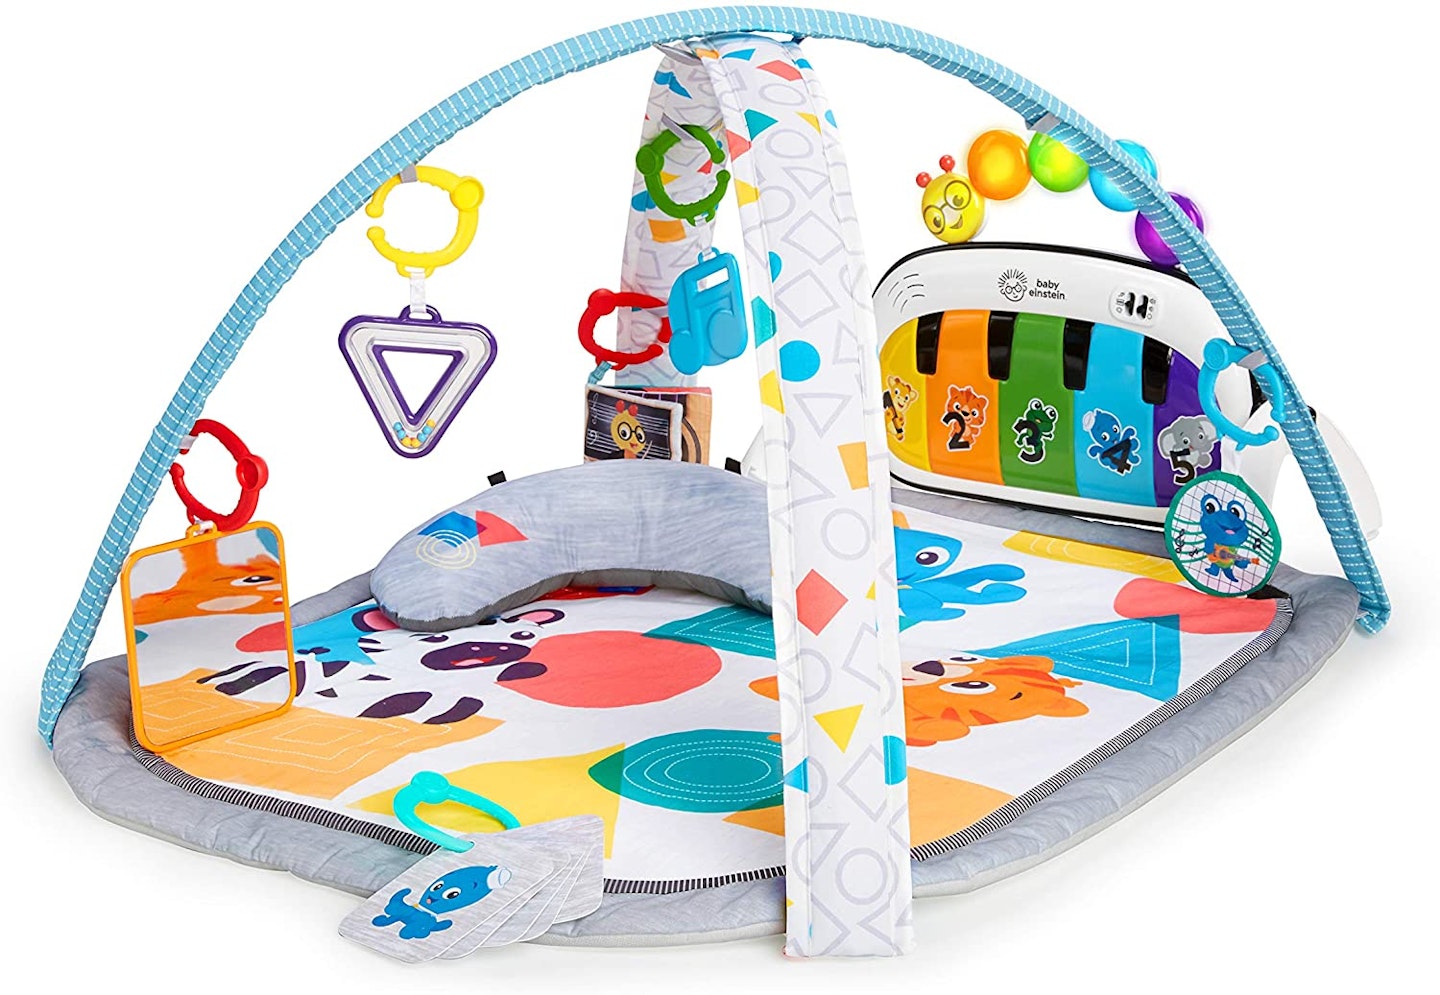 Baby Einstein, 4-in-1 Kickin' Tunes Music and Language Discovery Play Gym